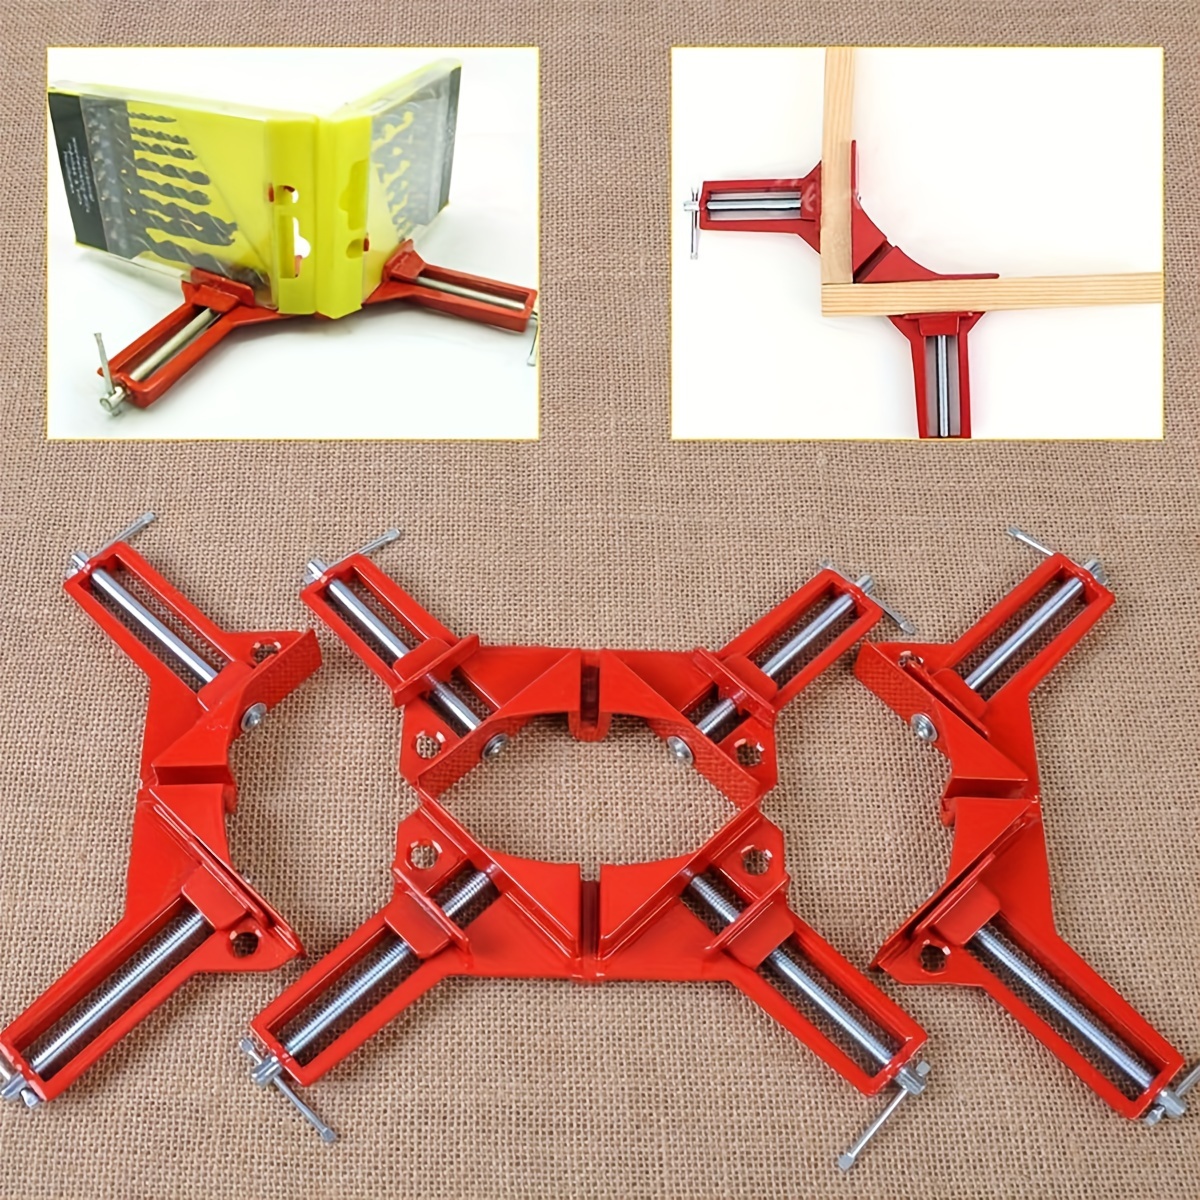 4inch Multifunction 90 Degree Right Angle Clip Picture Frame Corner Clamp  100MM Mitre Clamps Corner Holder Woodworking Hand Tool